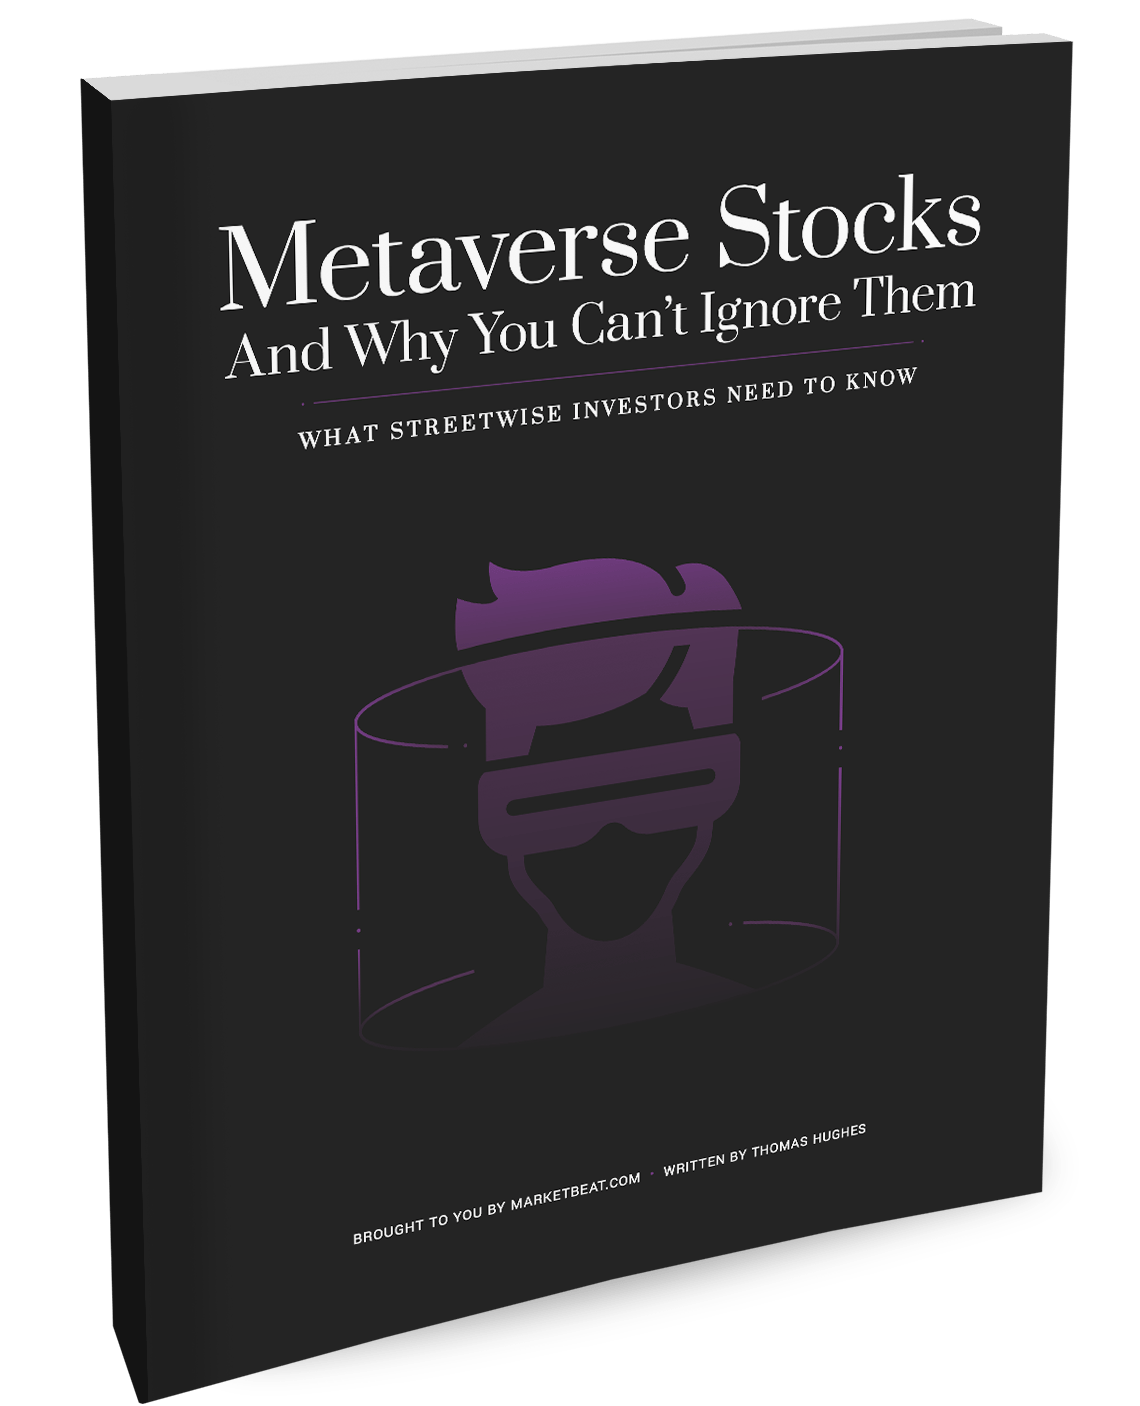 Metaverse Stocks and Why You Can't Ignore Them